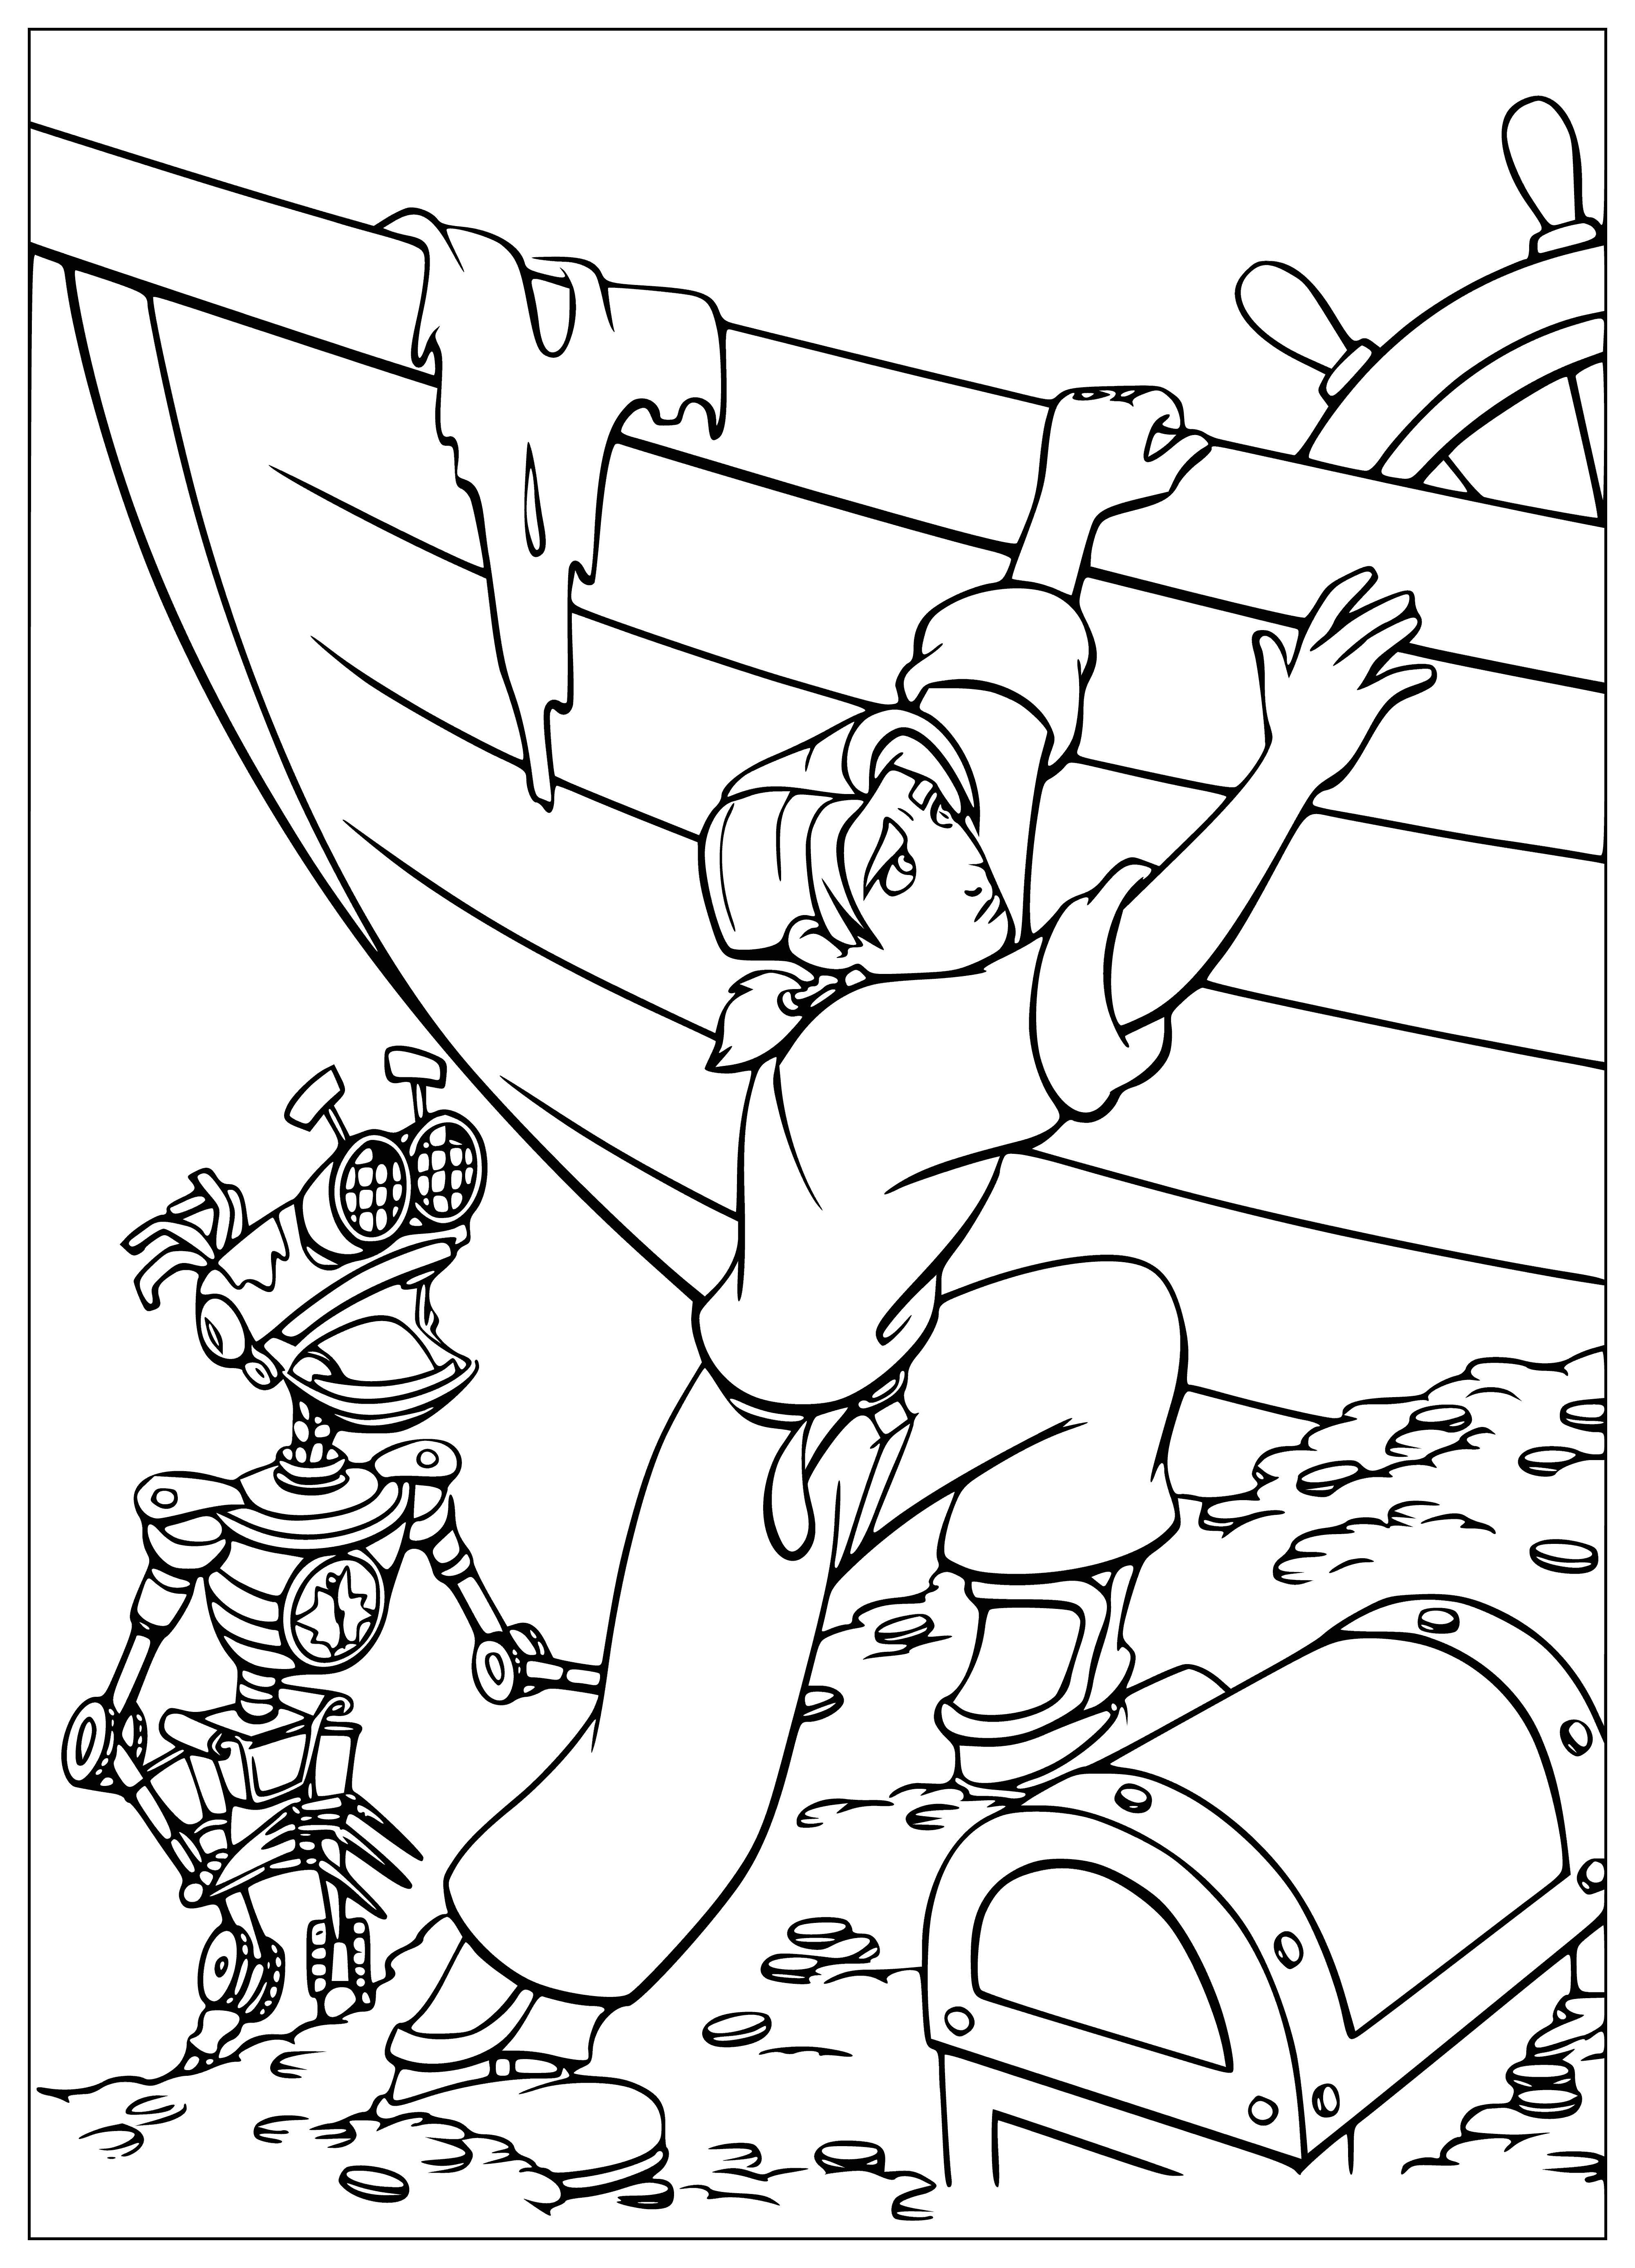 coloring page: Abandoned ship lies in the middle of a treasure-filled planet with a huge golden sun & 2 treasure chests. Hull cracked & sails torn, but fortunes await to be discovered.